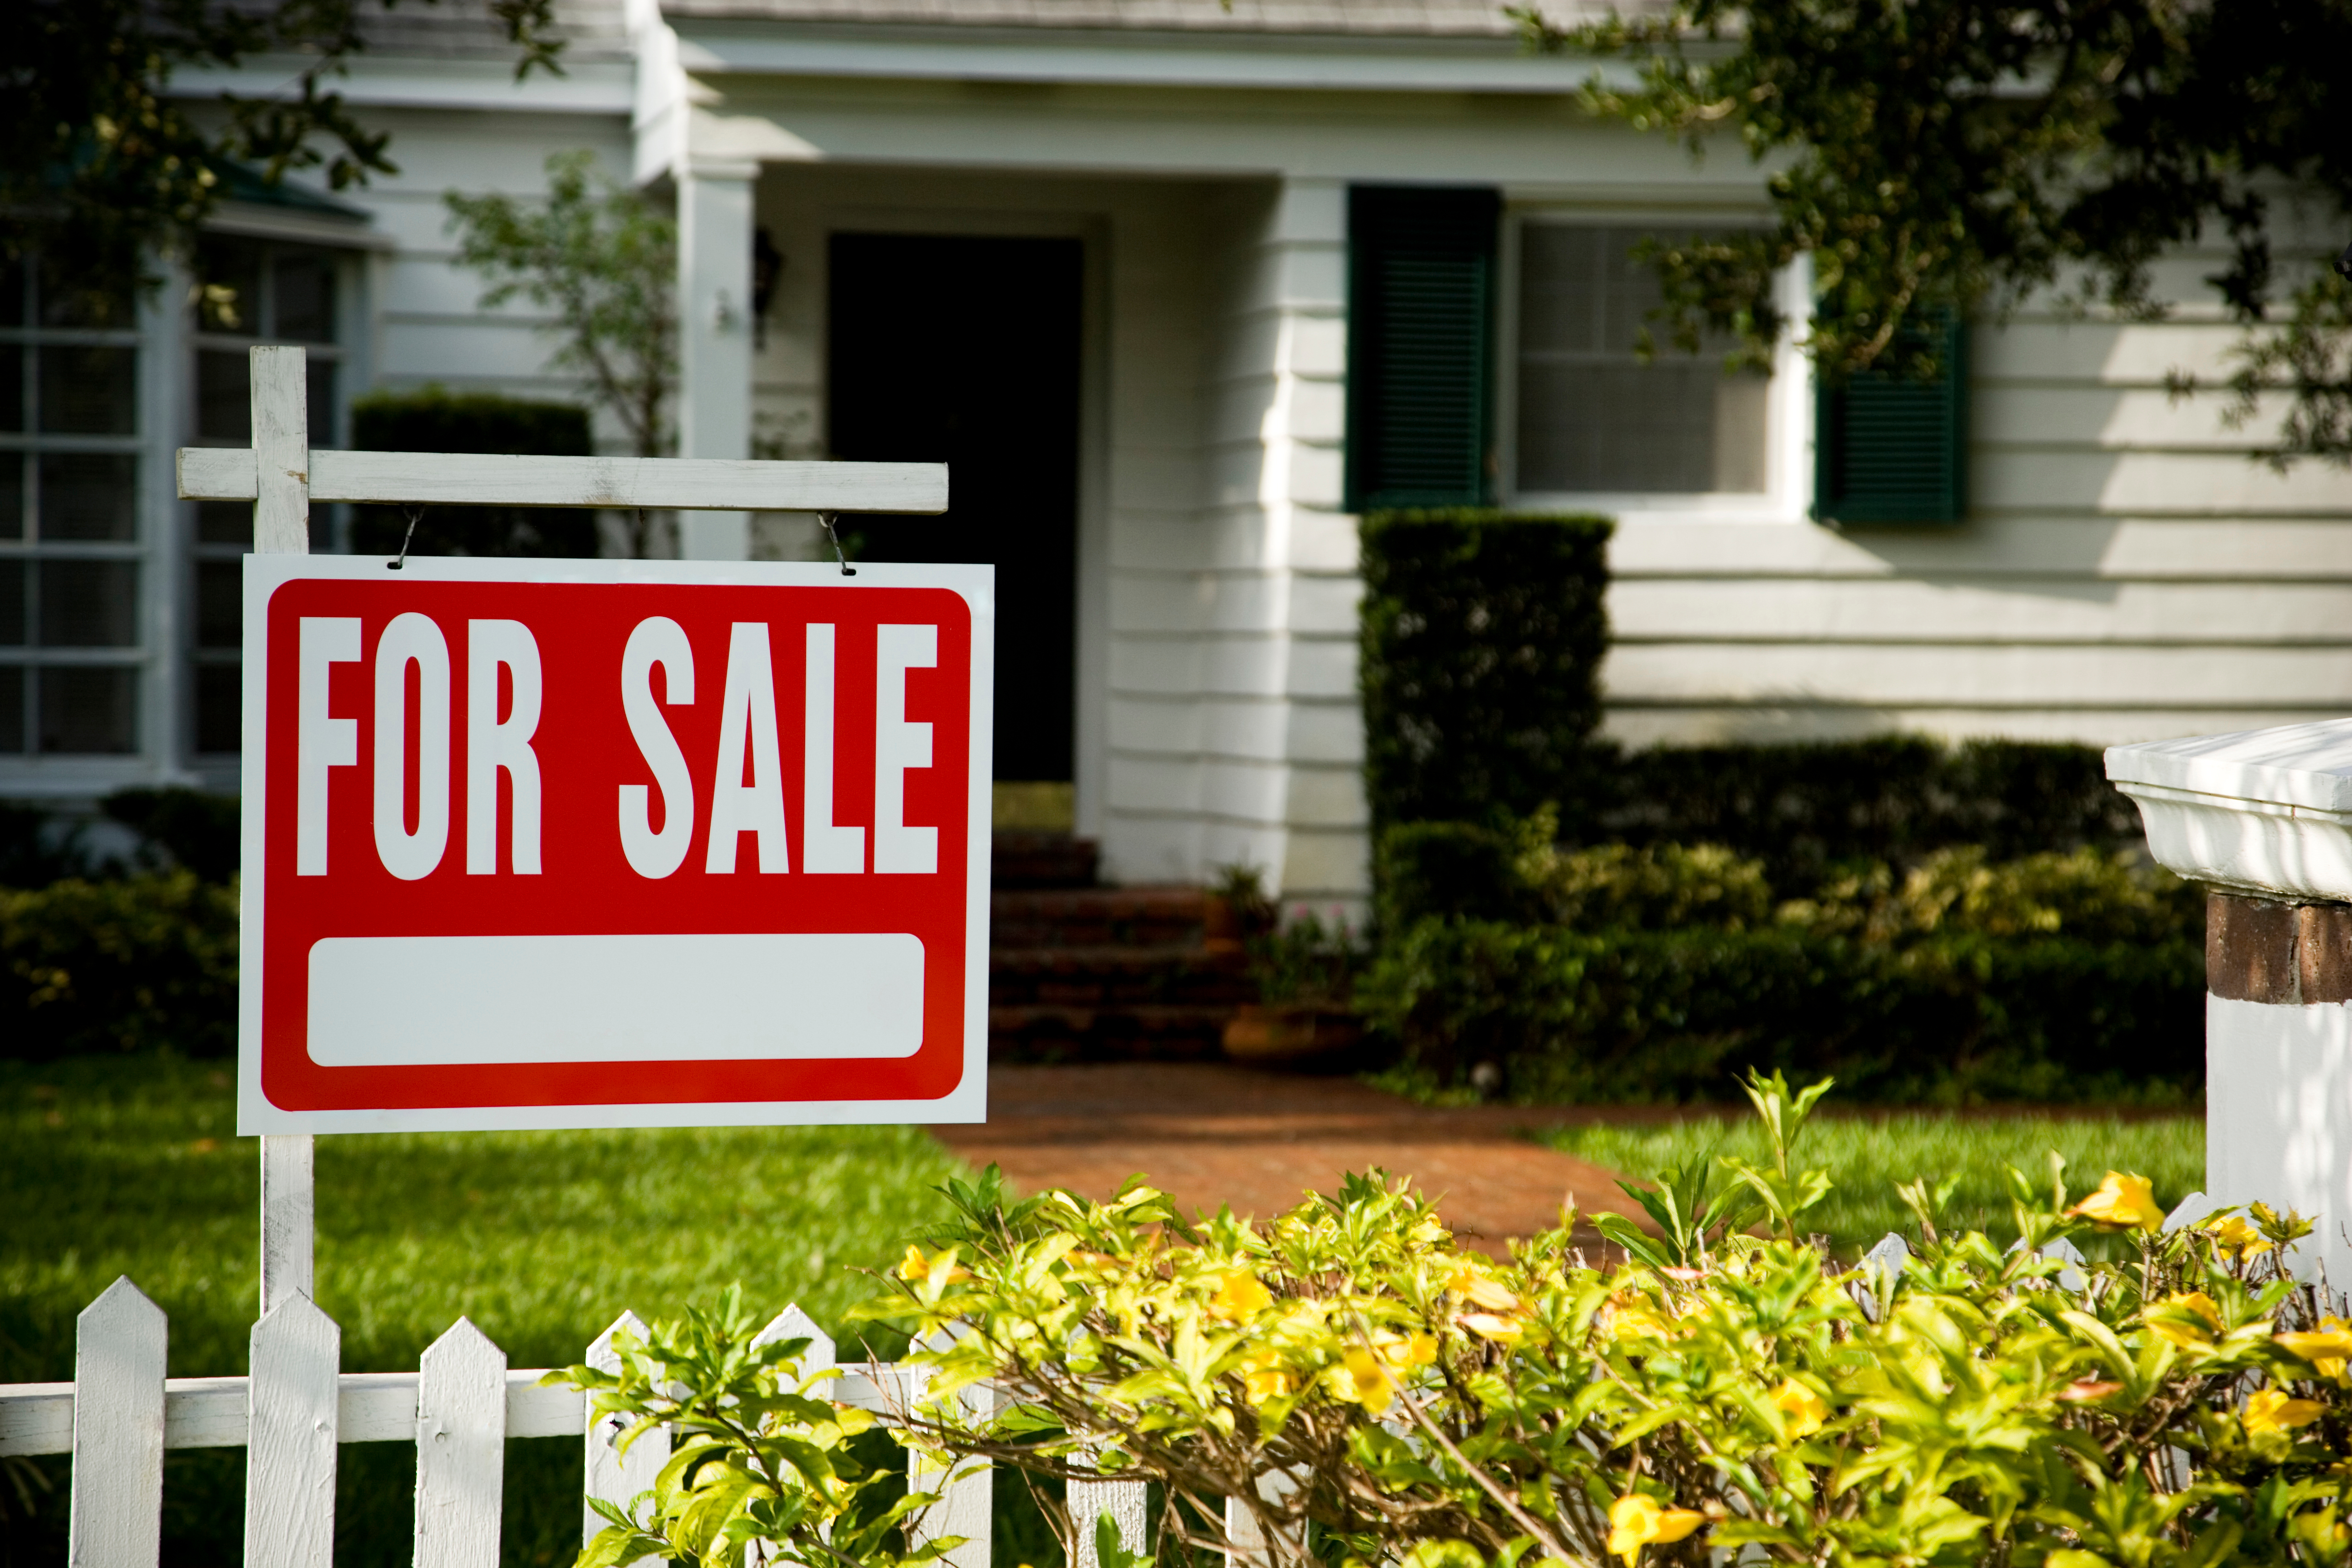 For sale sign outside a family house | Source: Shutterstock